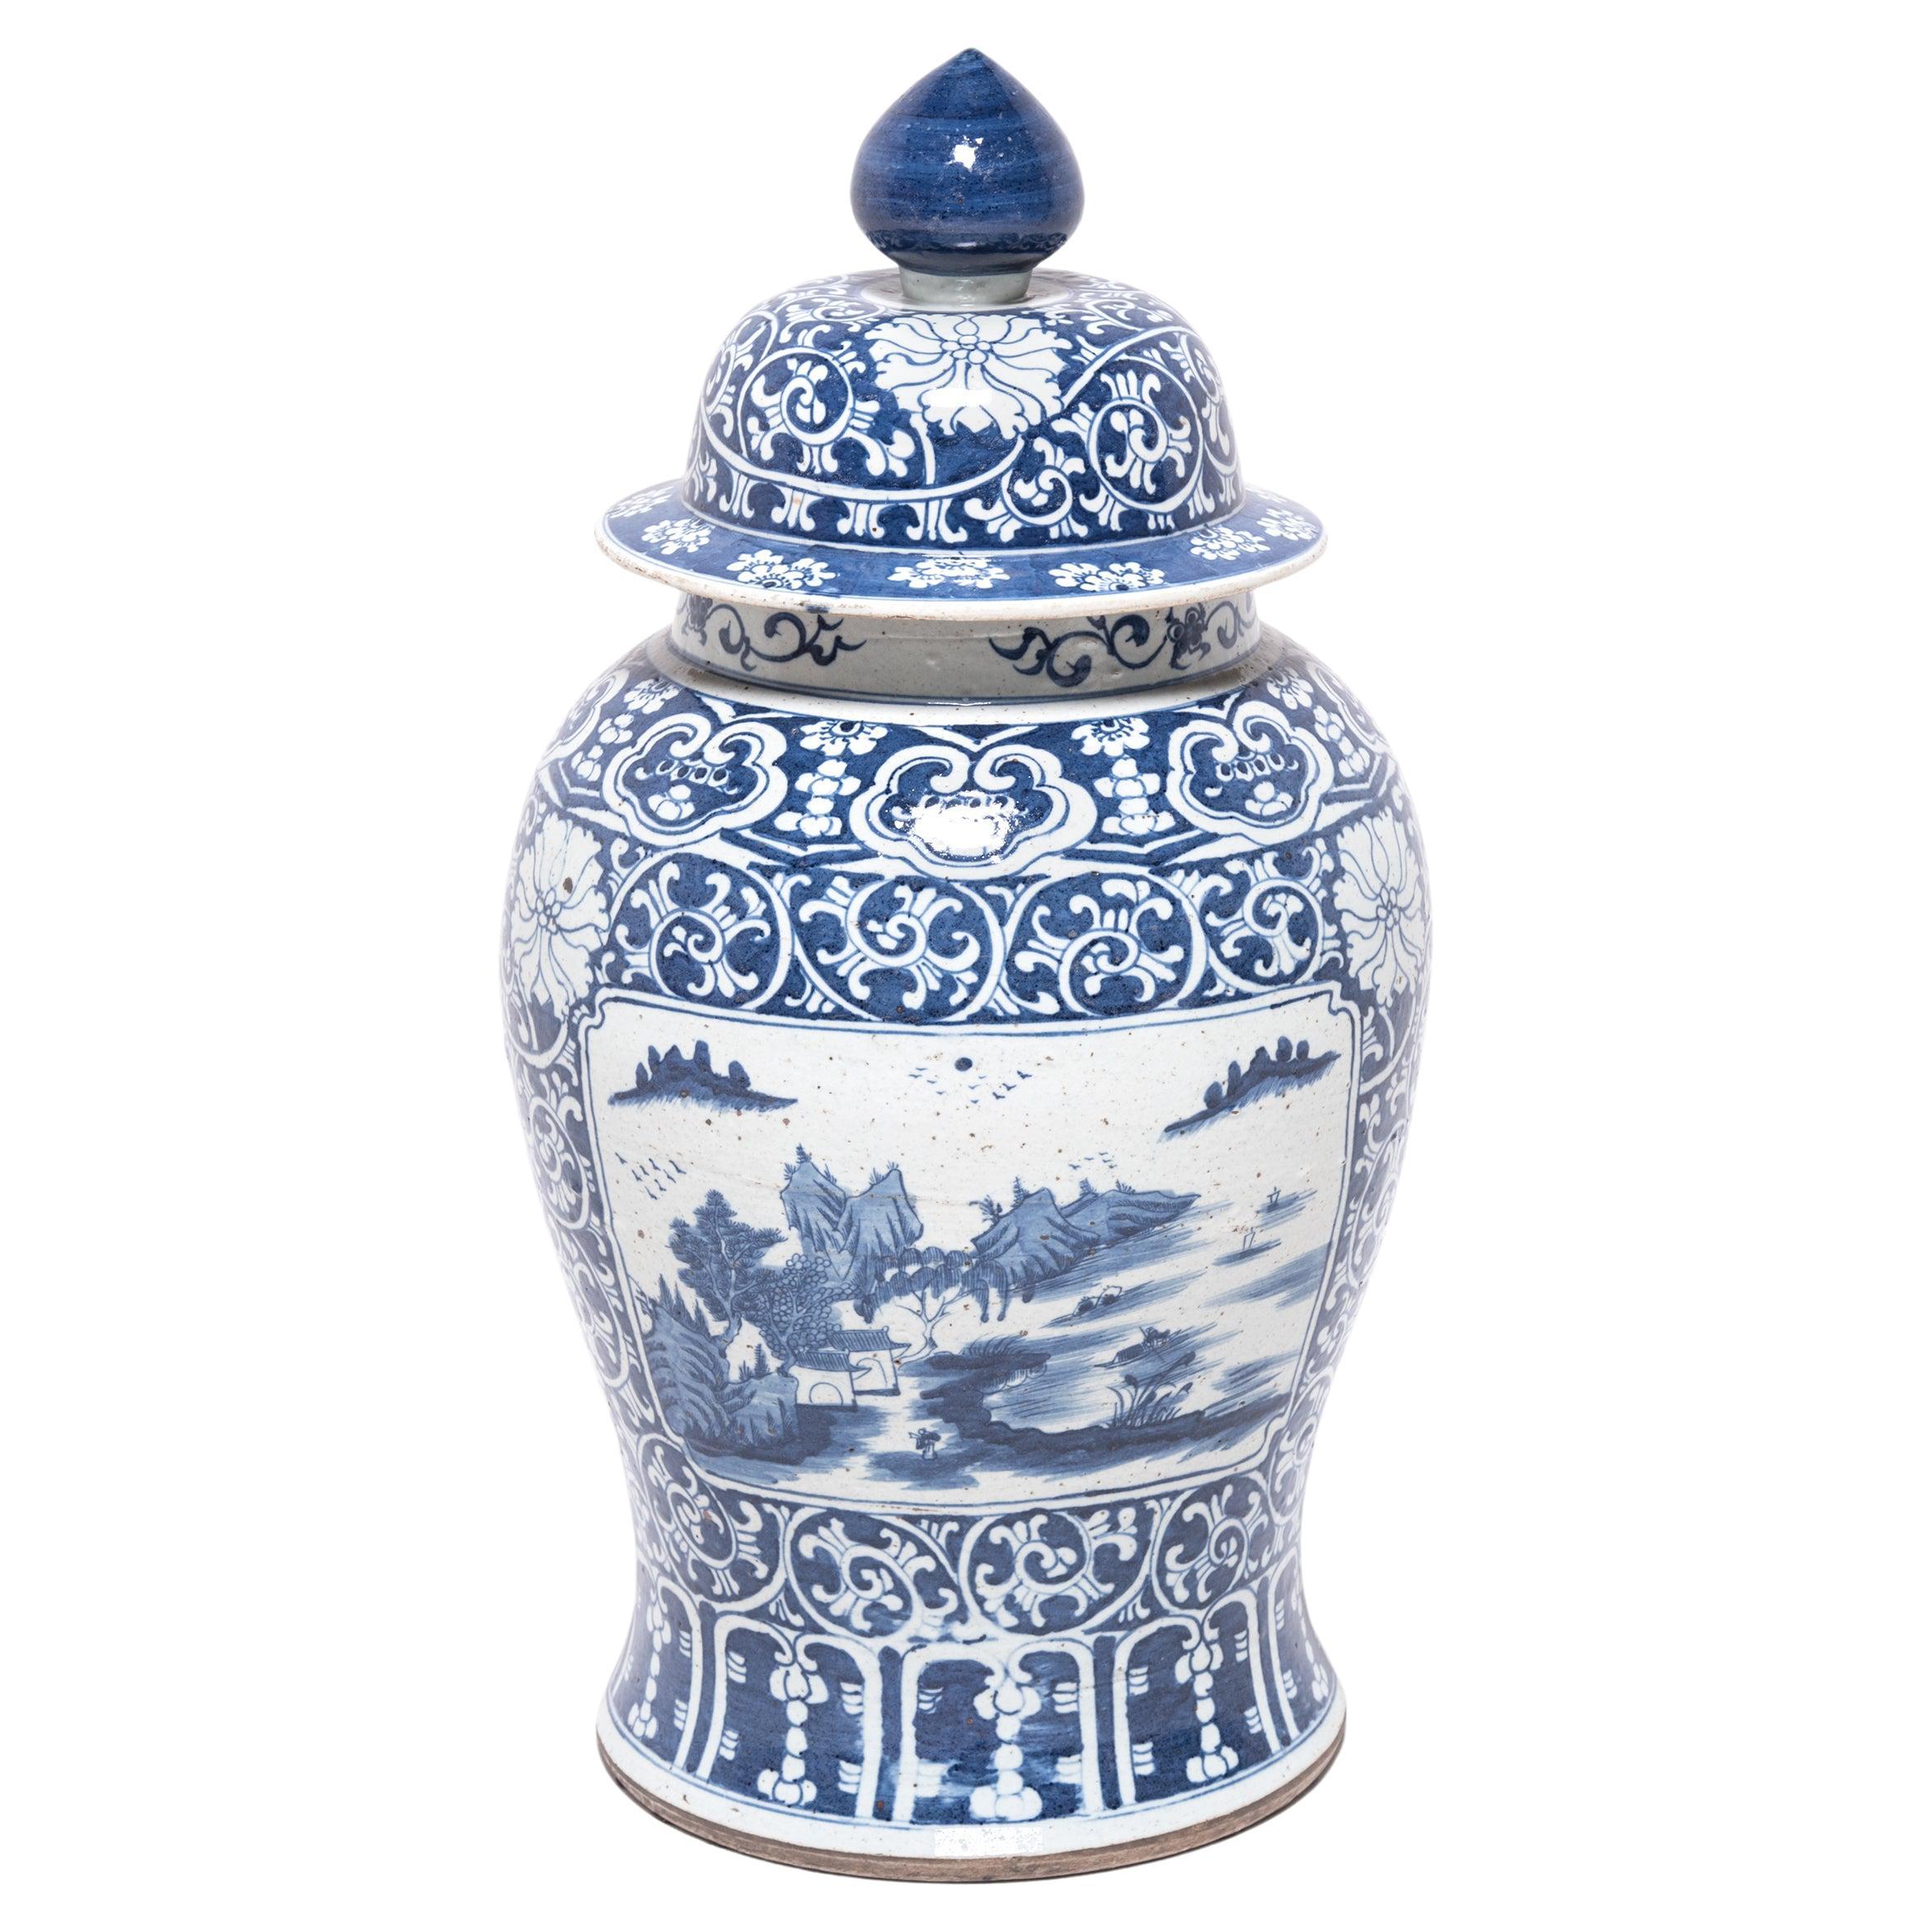 18in Floral Blue & White Porcelain Temple Jar Collectible Figurines for sale online 